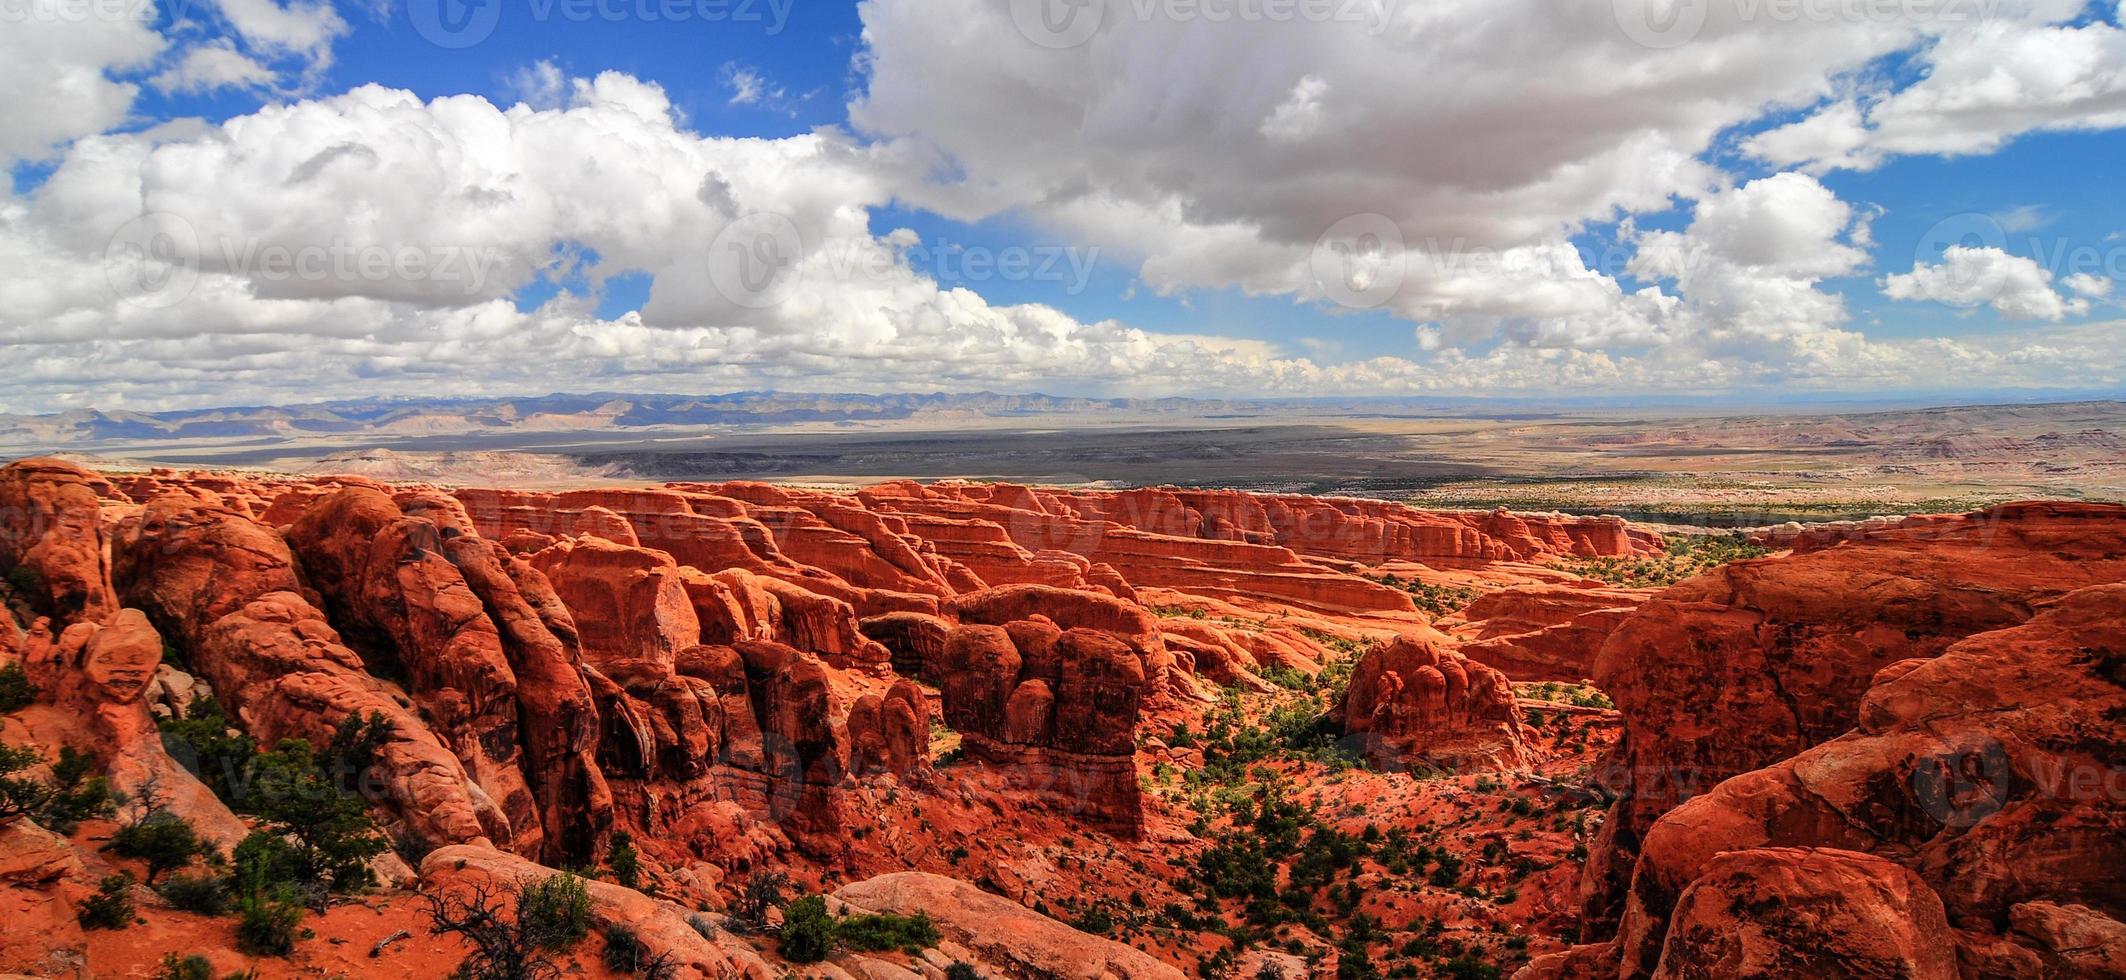 Dramatic Landscape of Arches National Park photo